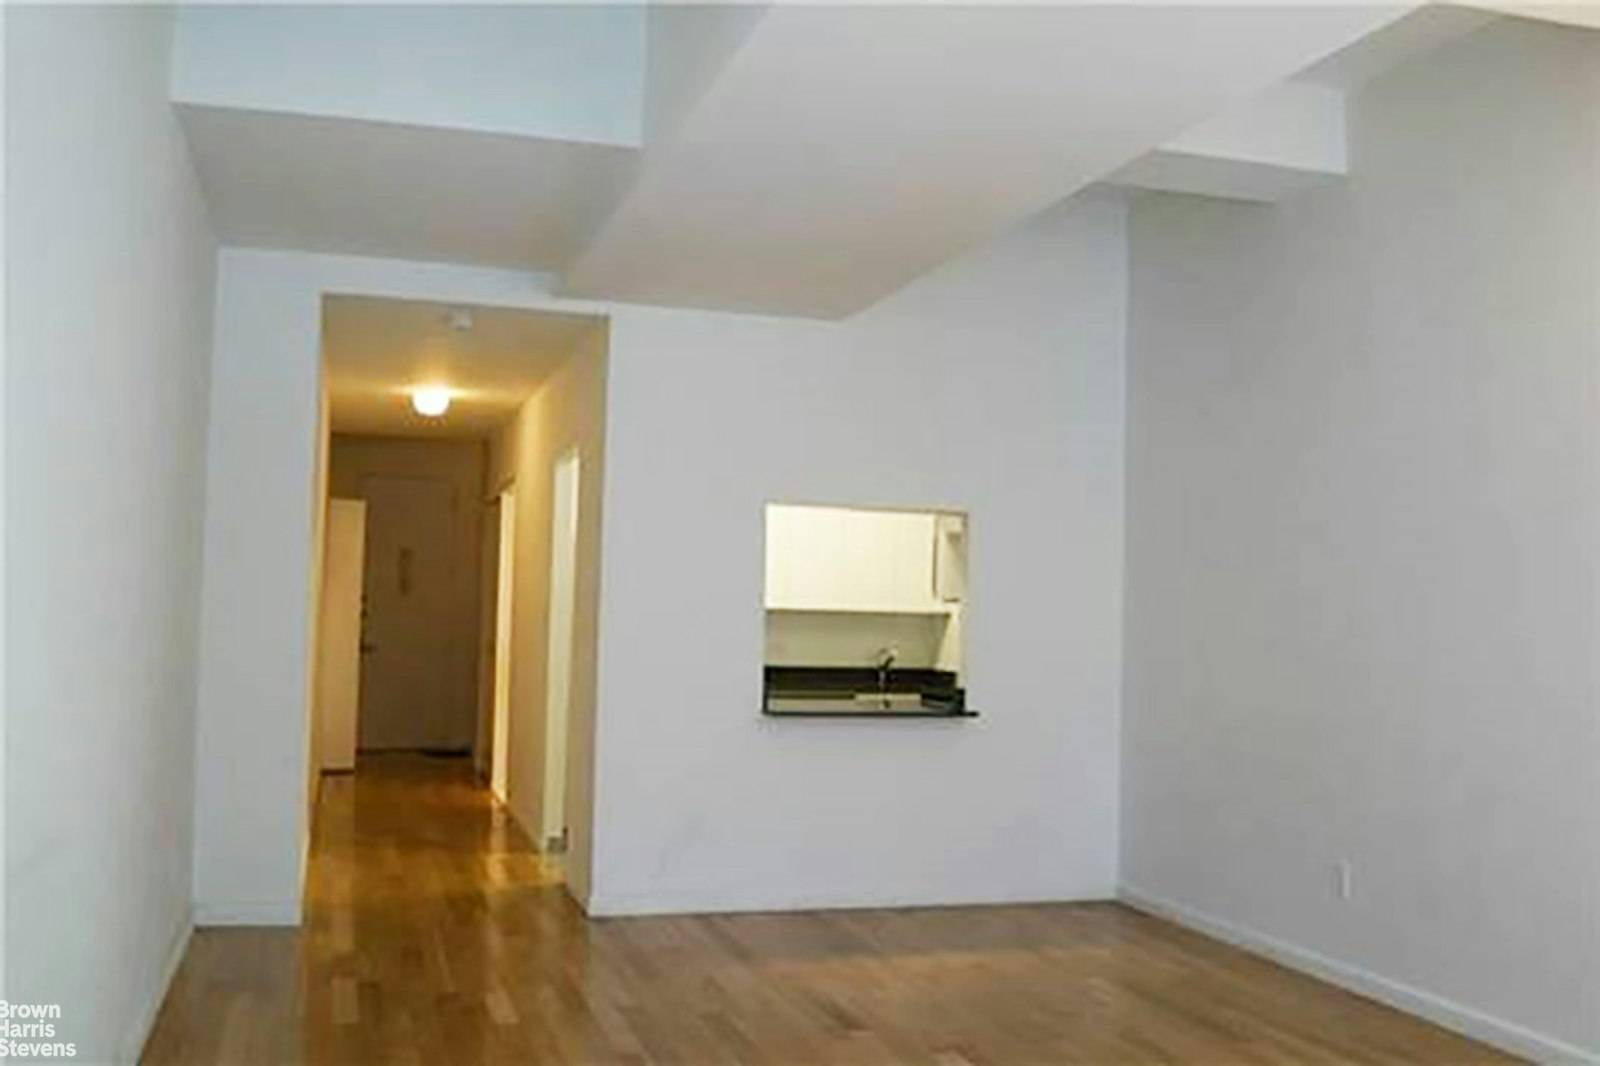 Available Immediately ! At approximately 700 square feet, this is the LARGEST AVAILABLE STUDIO APARTMENT RENTAL in the building, This high floor unit gets great unobstructed light, has high ceilings, ...